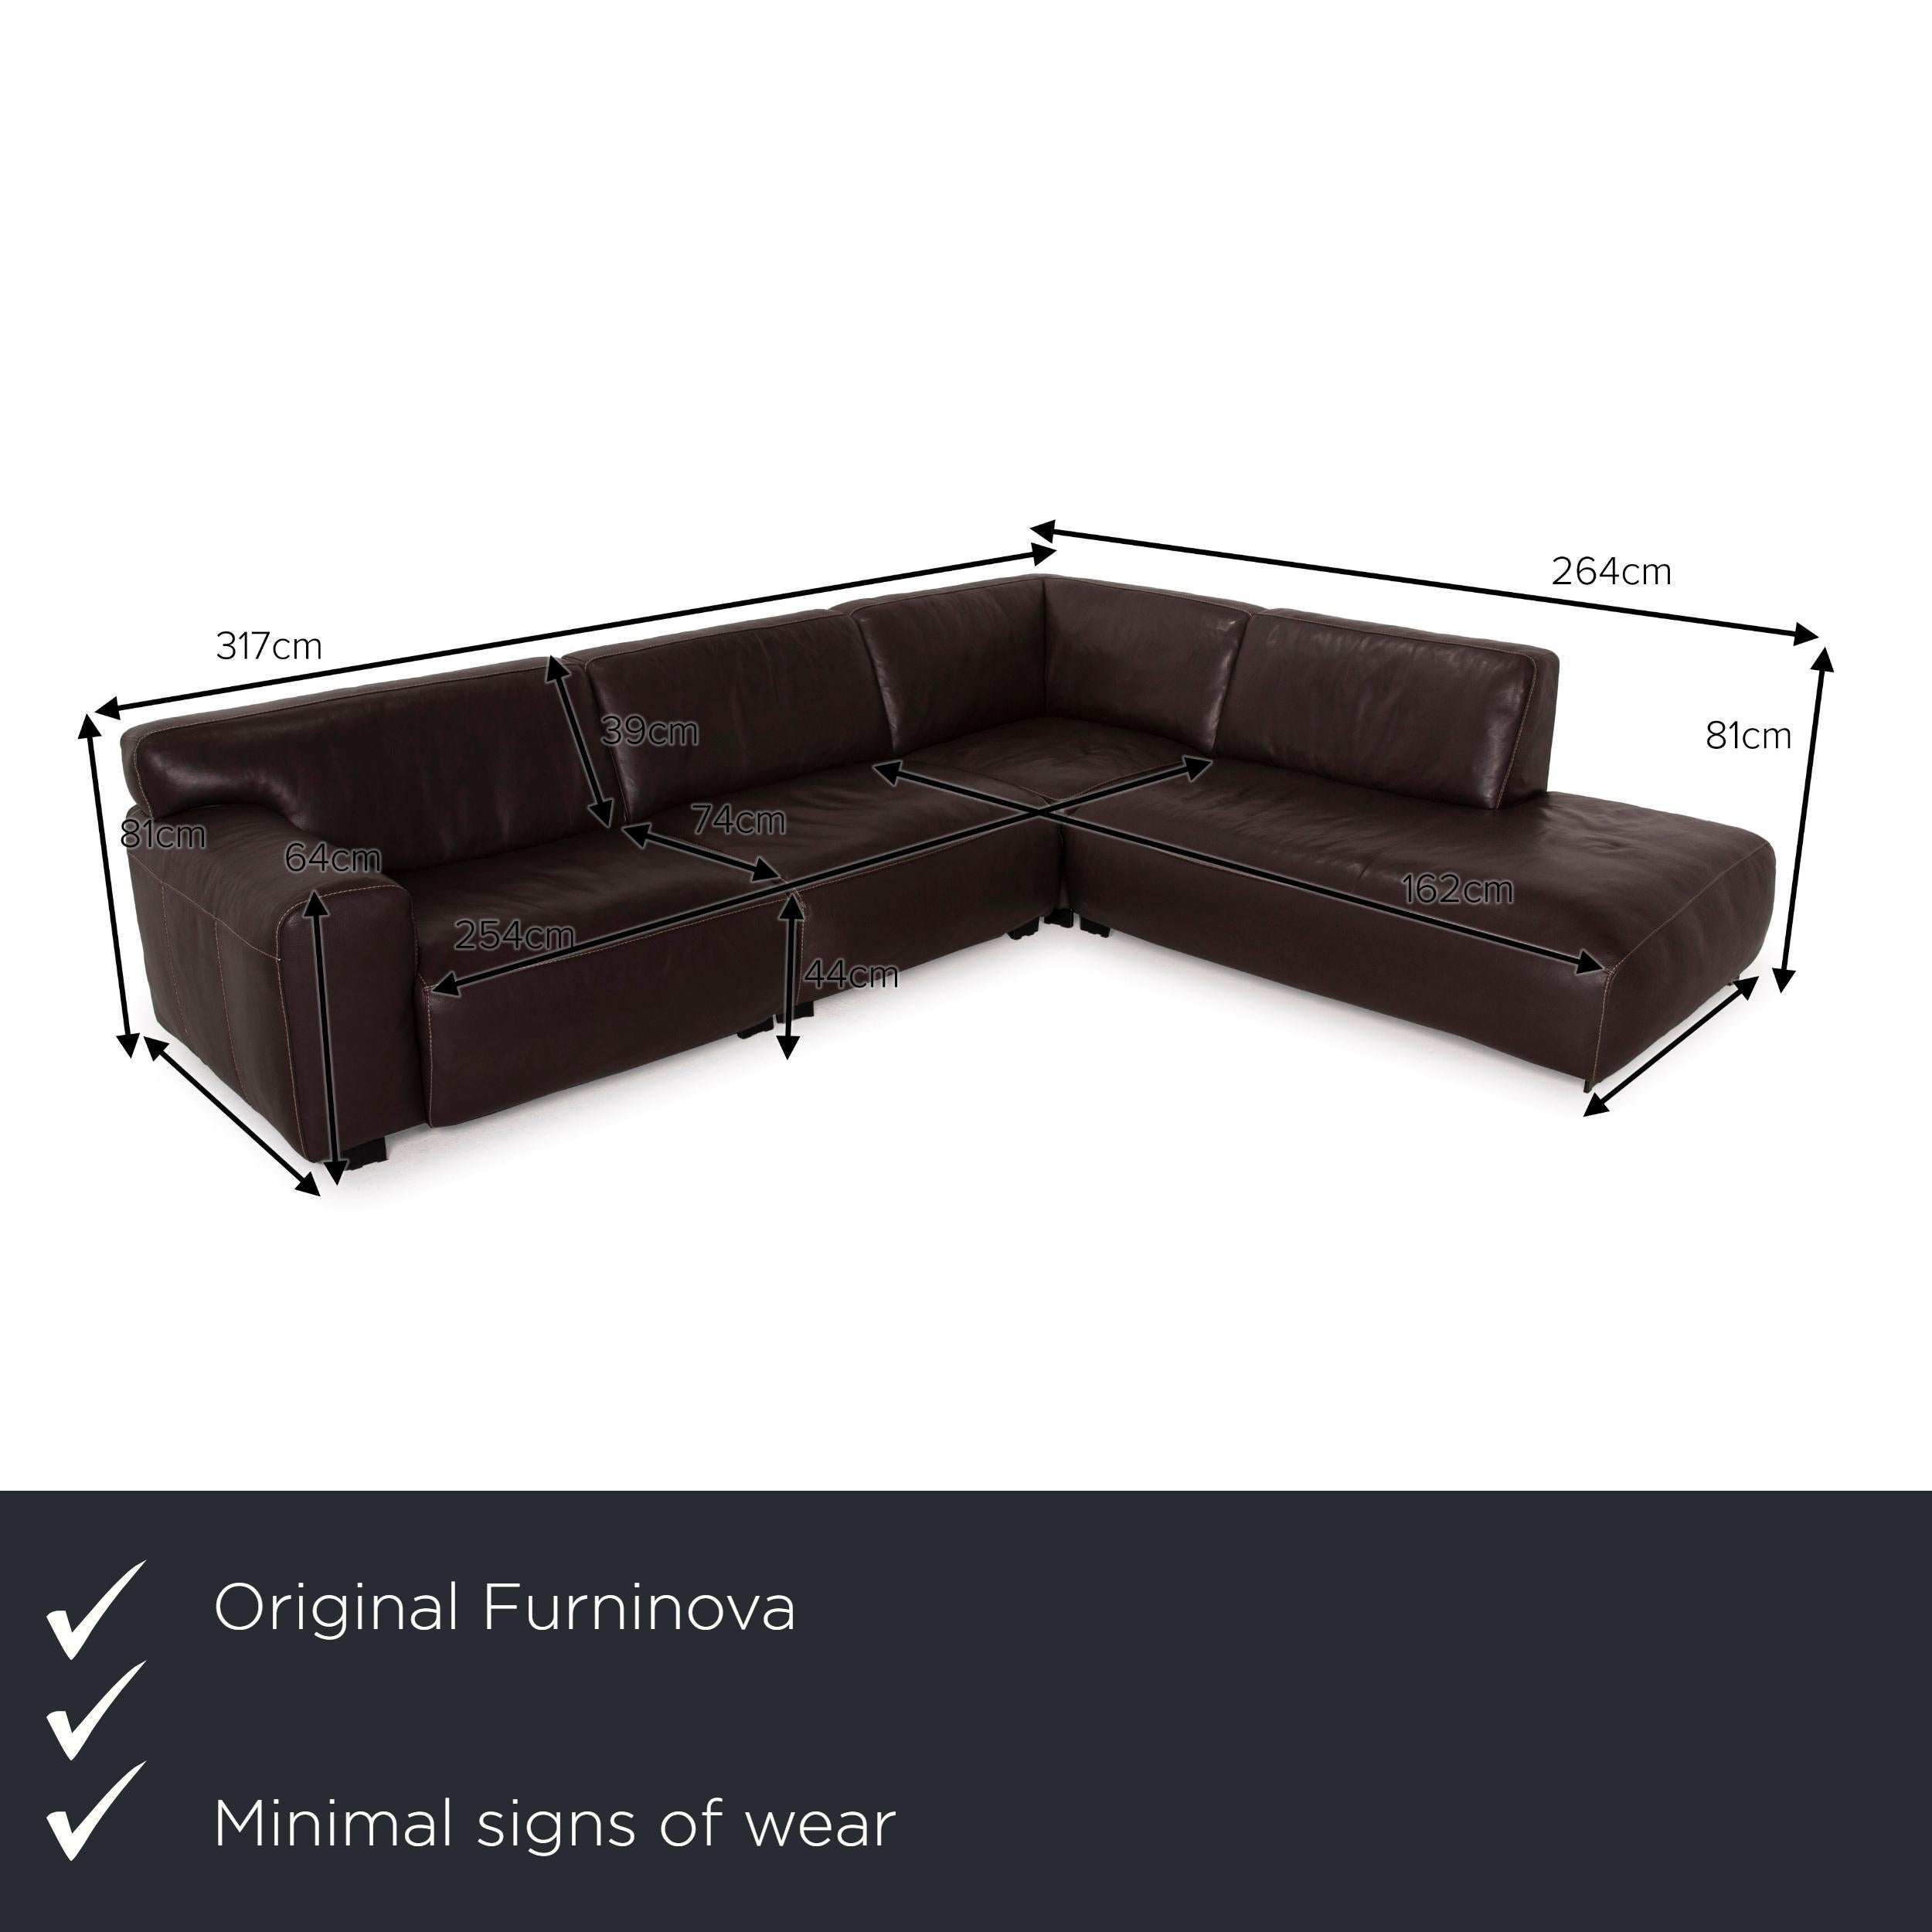 We present to you a Furninova leather sofa brown corner sofa.
  
 

 Product measurements in centimeters:
 

 depth: 107
 width: 317
 height: 81
 seat height: 44
 rest height: 64
 seat depth: 74
 seat width: 254
 back height: 39.